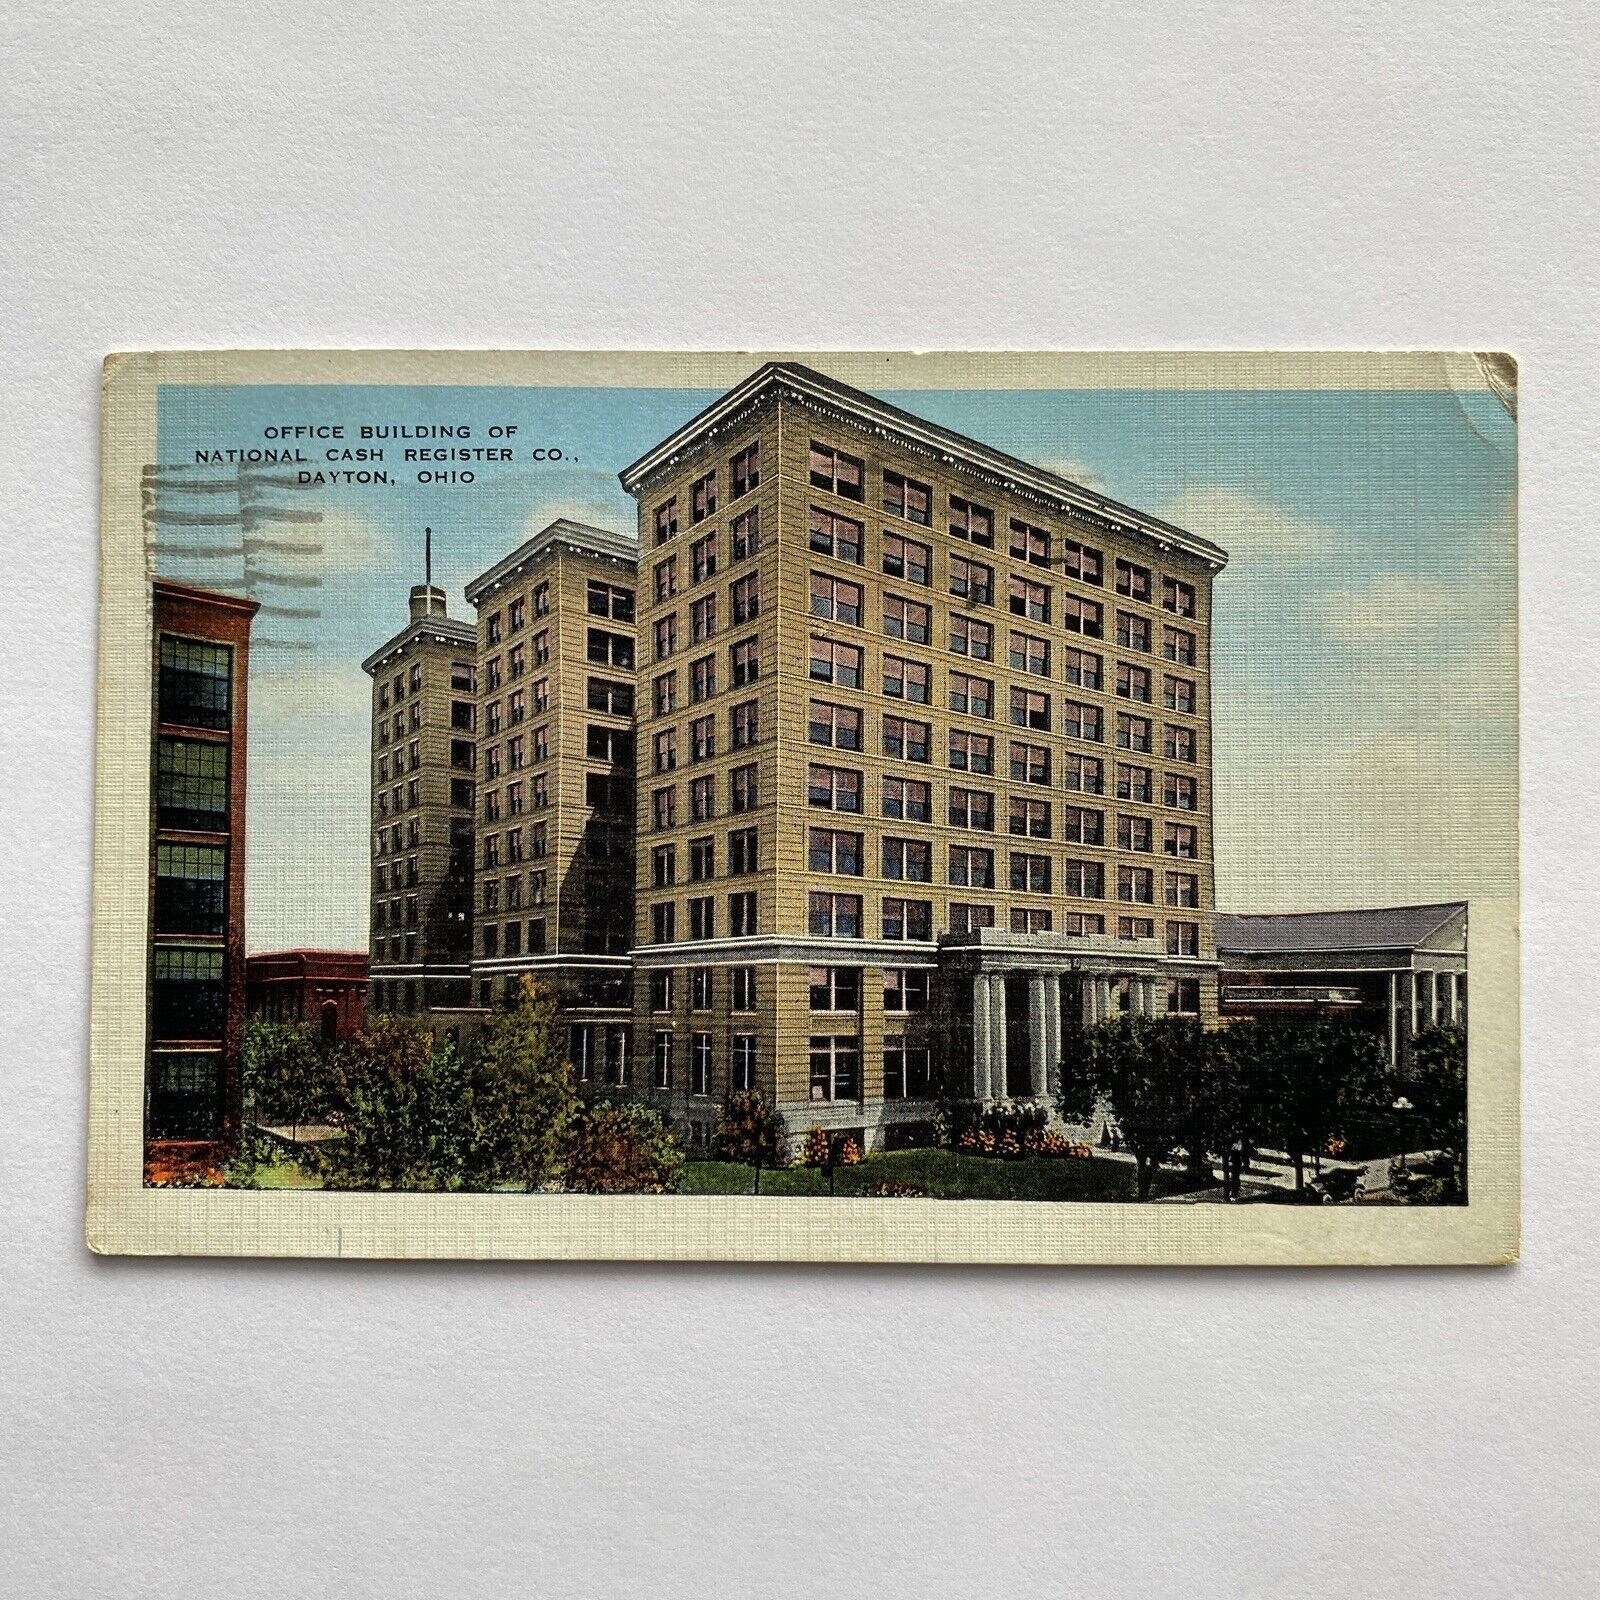 Office Building Of National Cash Register Co NCR Dayton Ohio Posted 1942